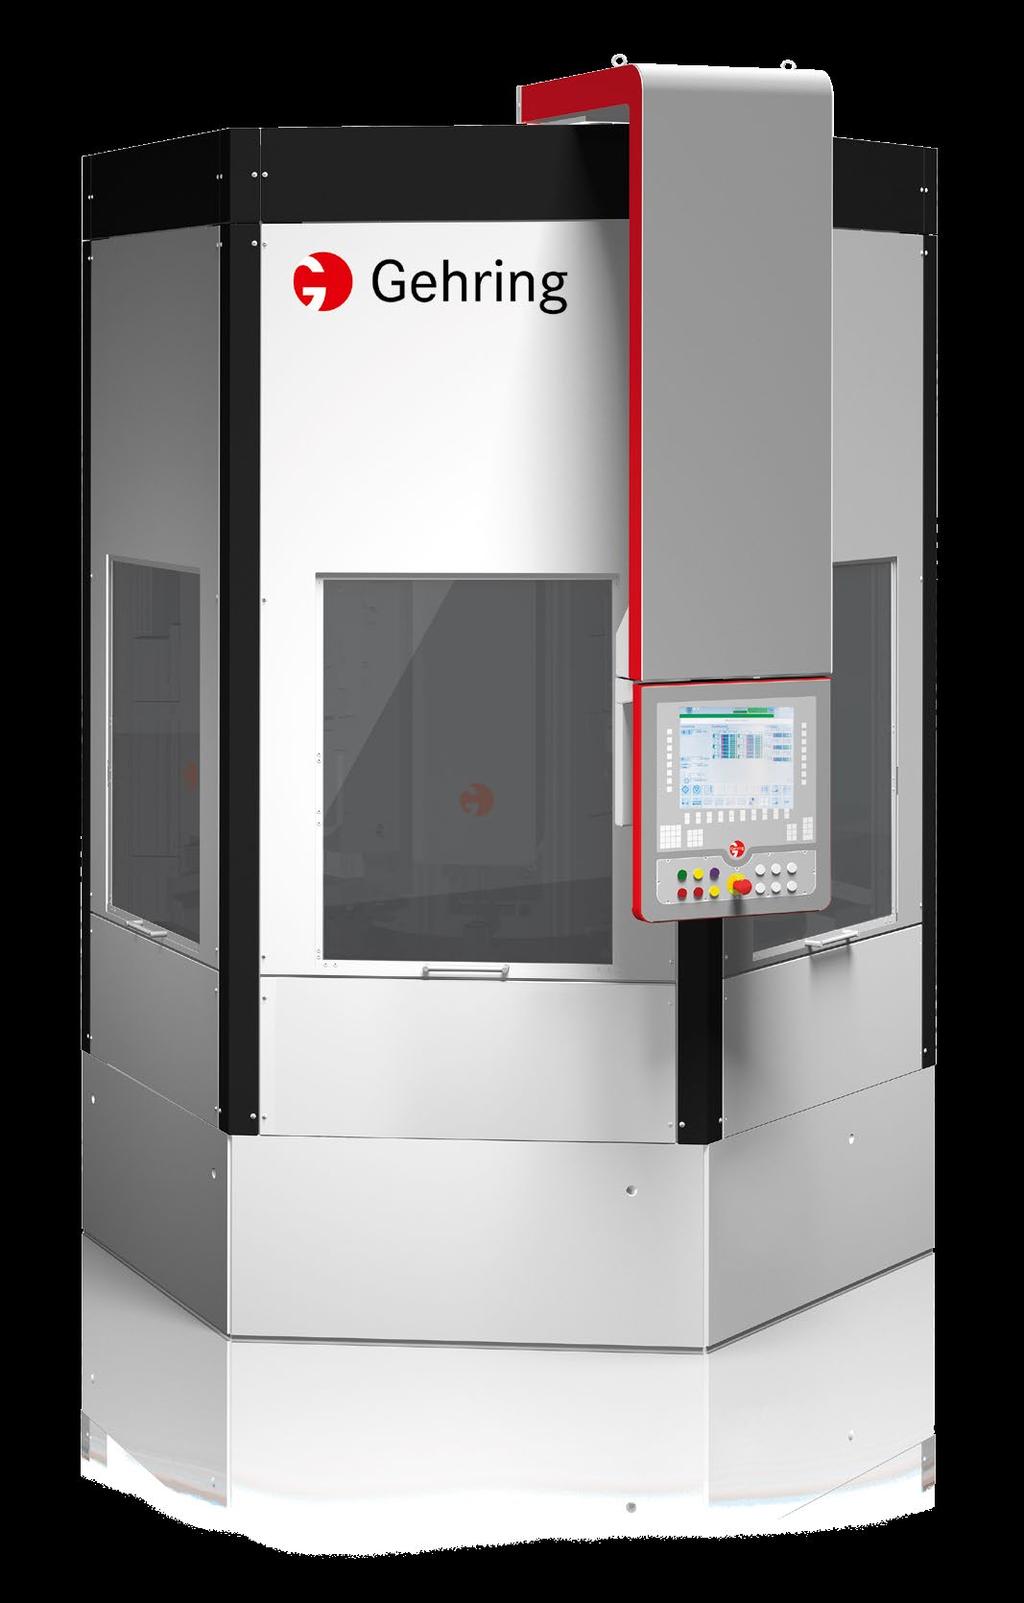 Honing center with inner column and rotary table The Gehring honing center with inner column construction combines modern design with optimized accessibility.